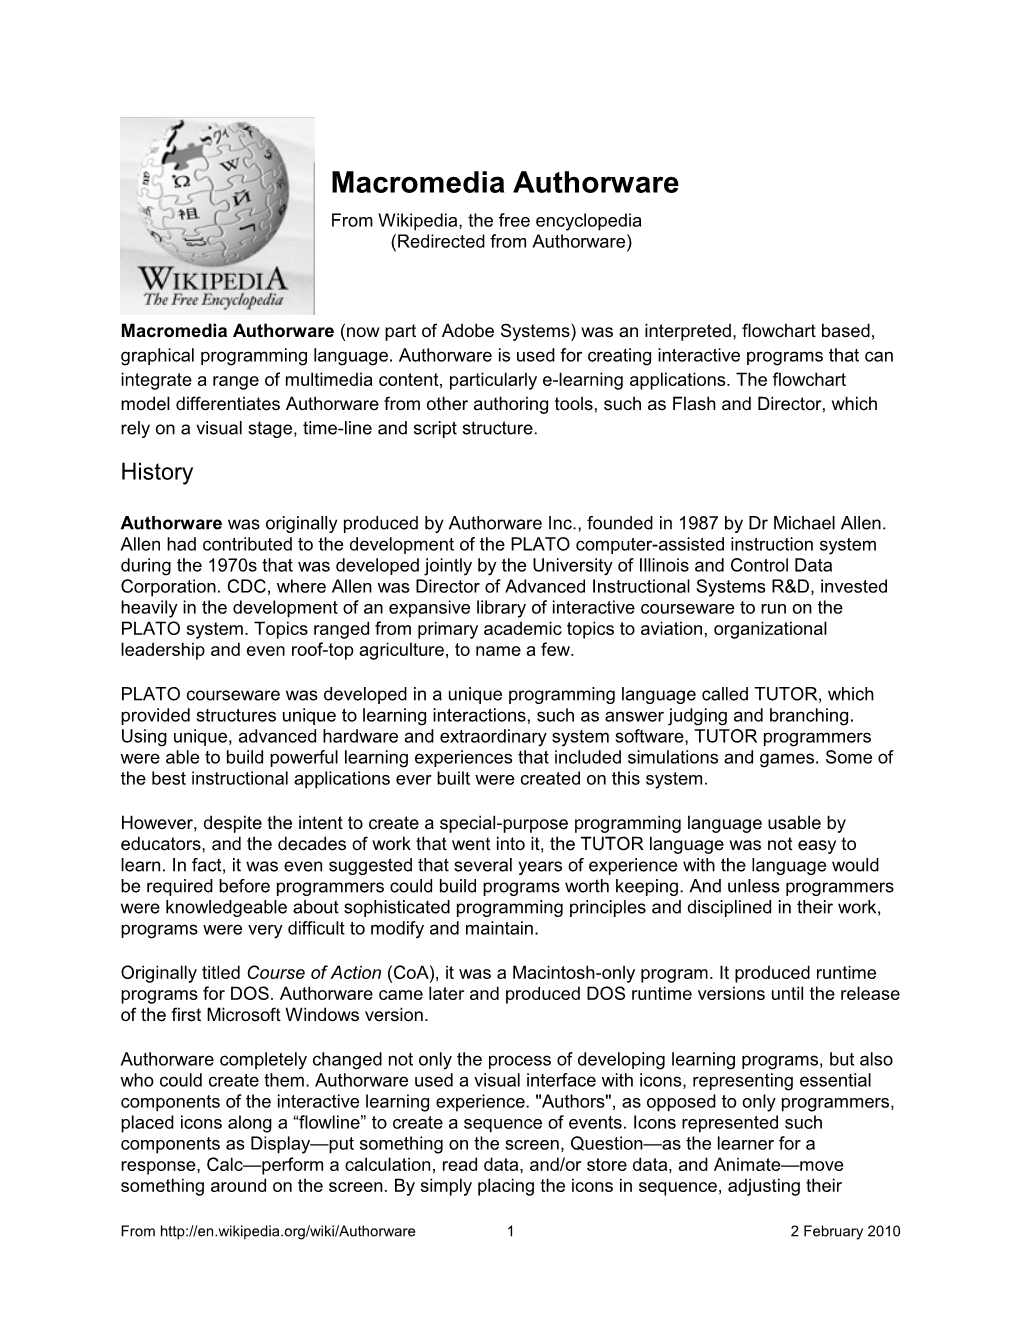 Macromedia Authorware from Wikipedia, the Free Encyclopedia (Redirected from Authorware)